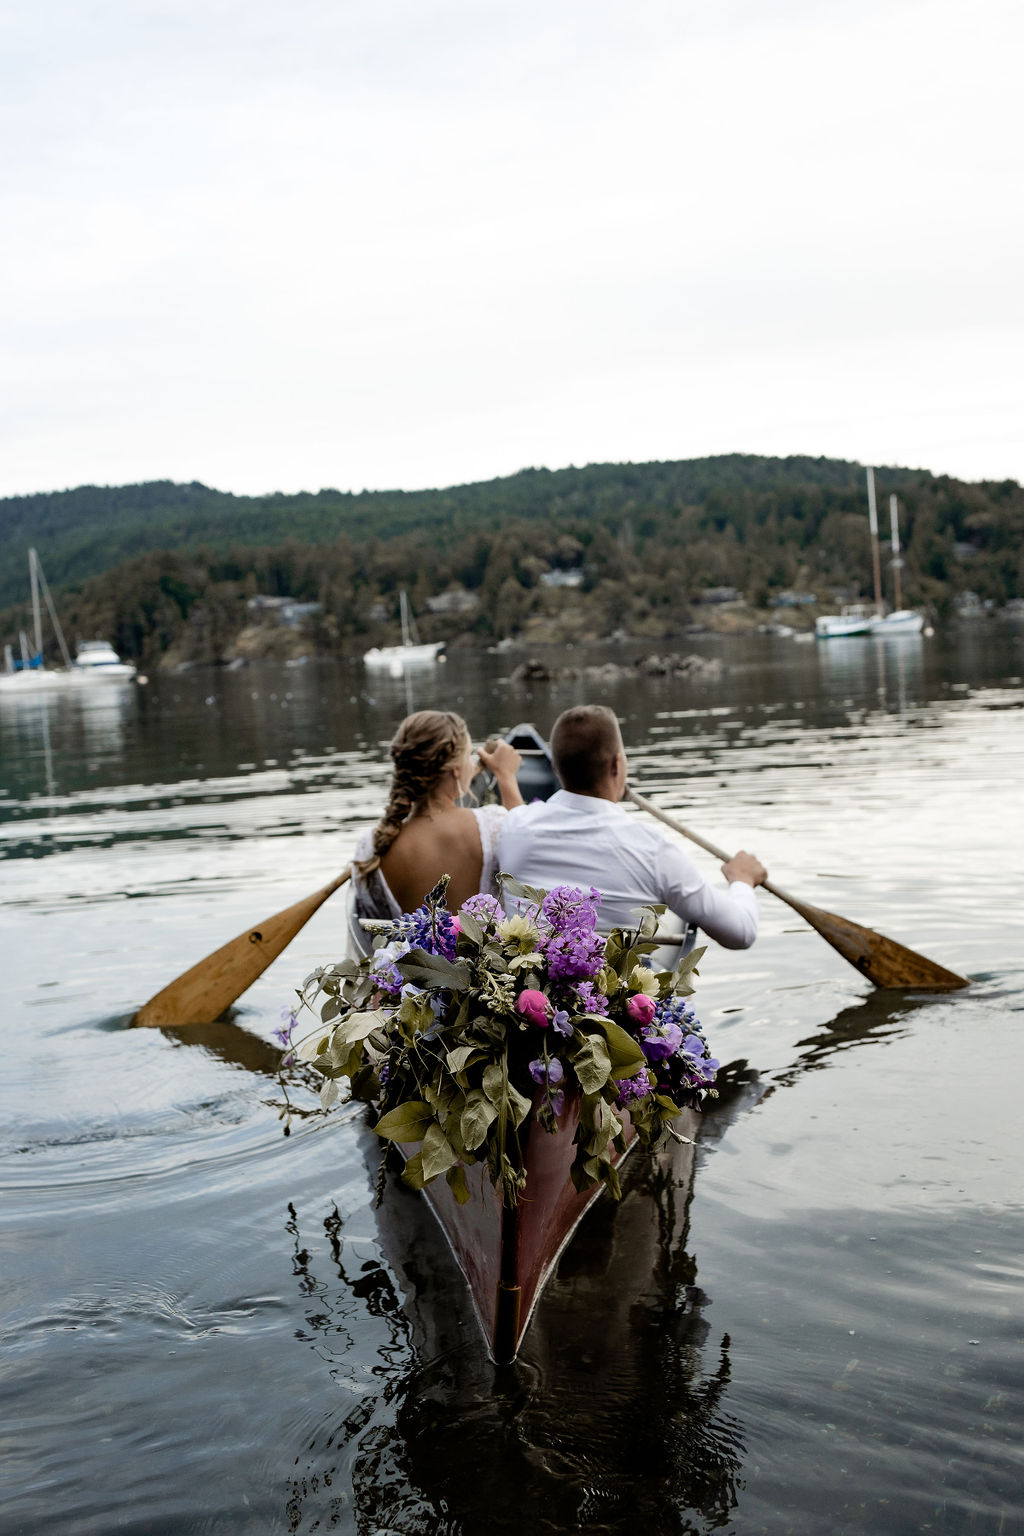 Newlyweds paddle canoe filled with purple and pink flowers on Vancouver Island